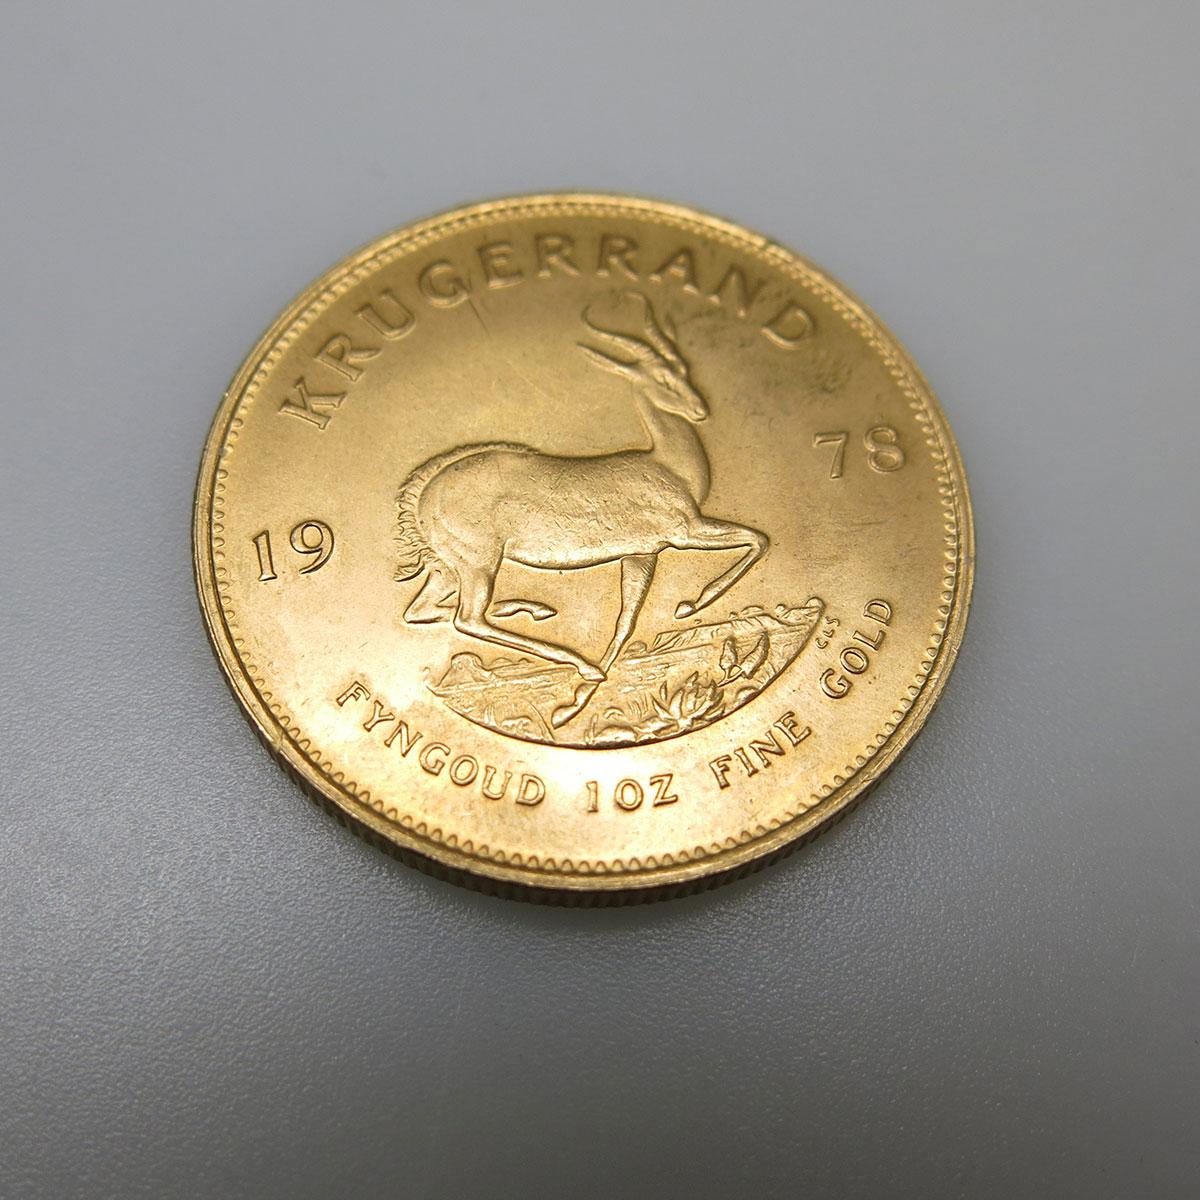 South African 1978 Krugerrand Gold Coin